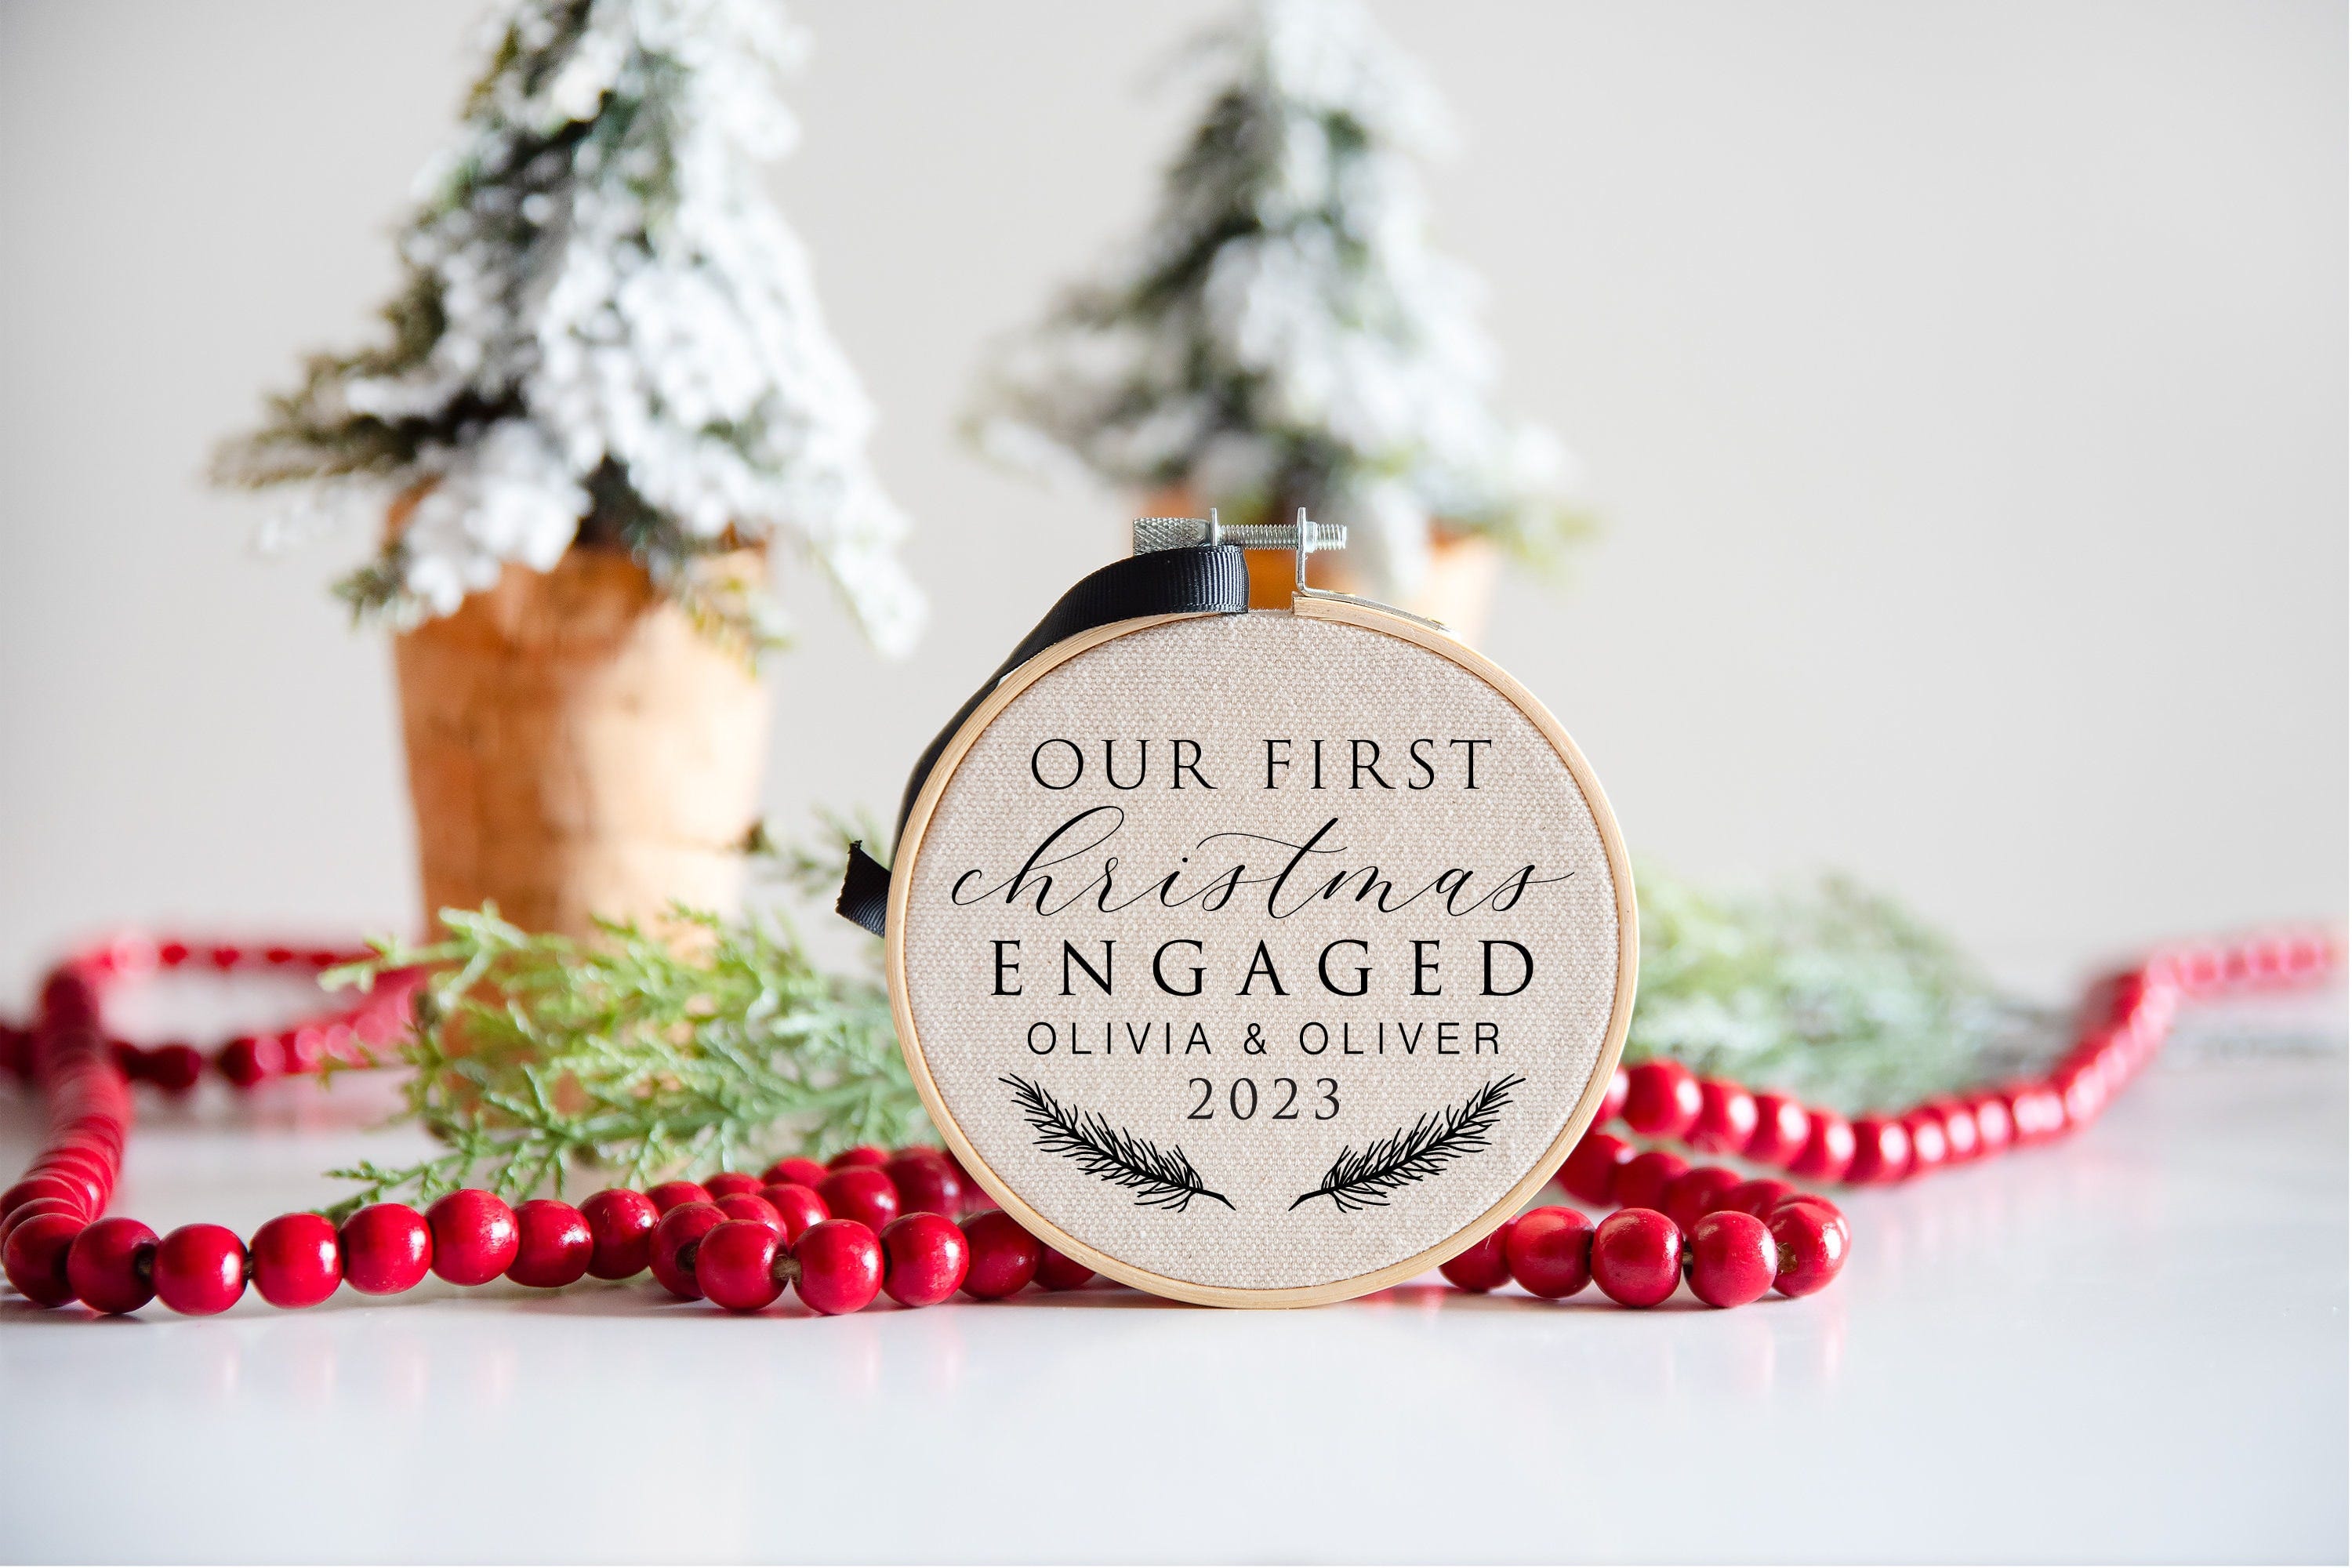 Our First Christmas Engaged 2023 SVG - Christmas Engagement Svg, Ornament Svg, Christmas 2023 Svg, Cut File